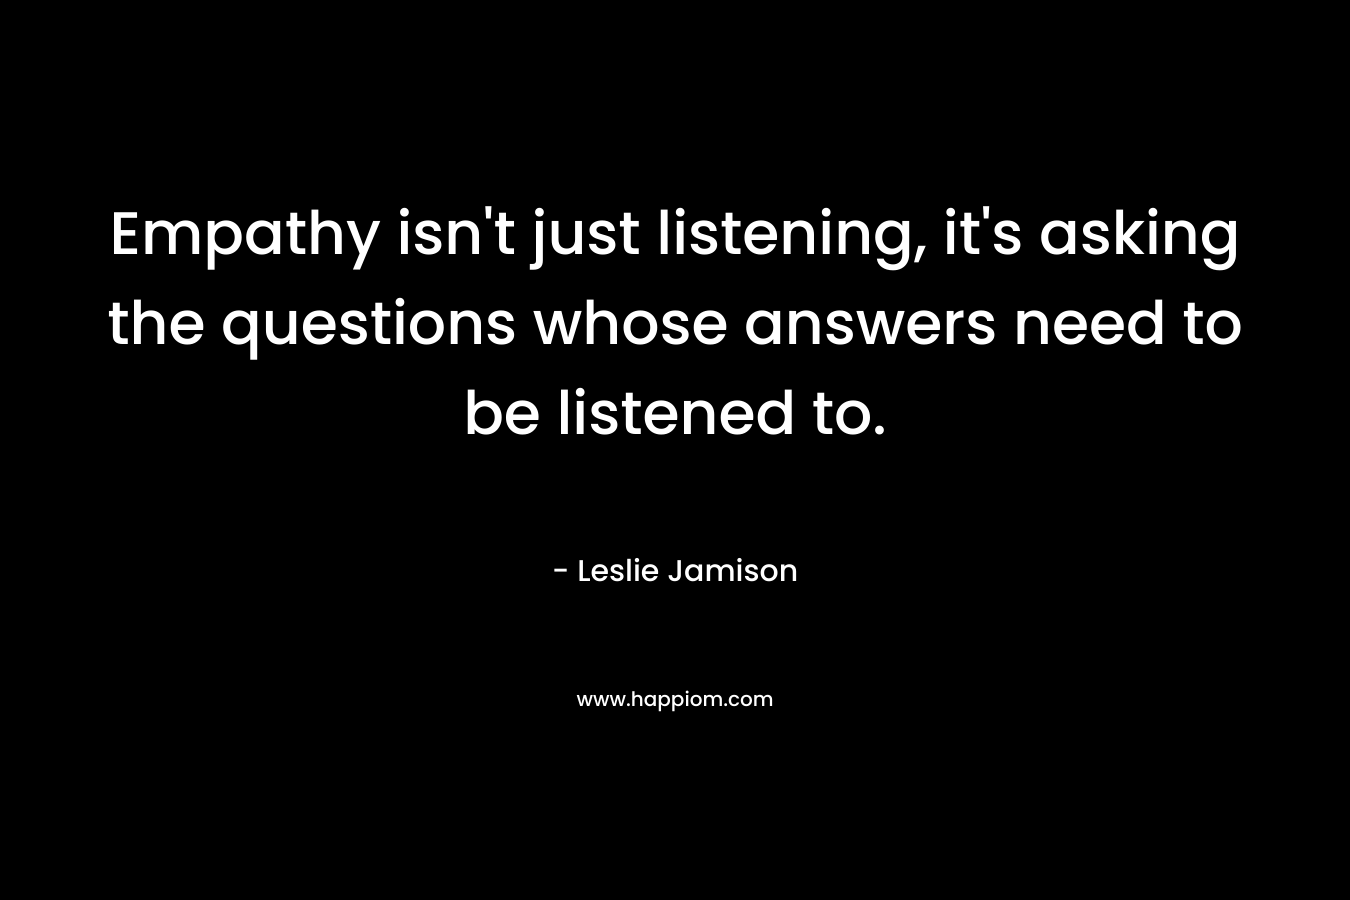 Empathy isn't just listening, it's asking the questions whose answers need to be listened to.